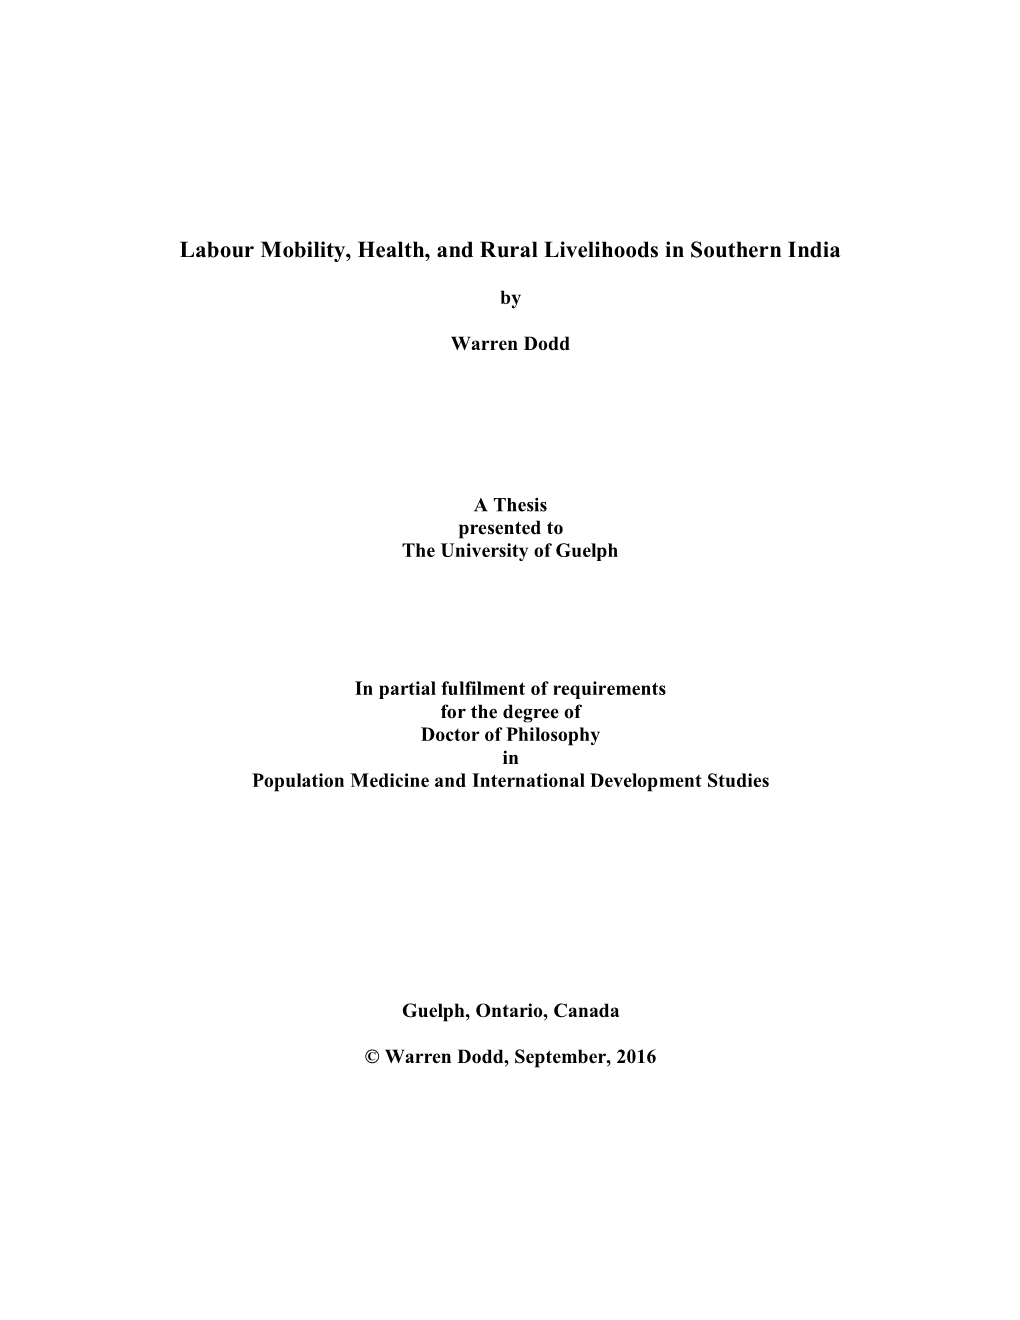 Labour Mobility, Health, and Rural Livelihoods in Southern India